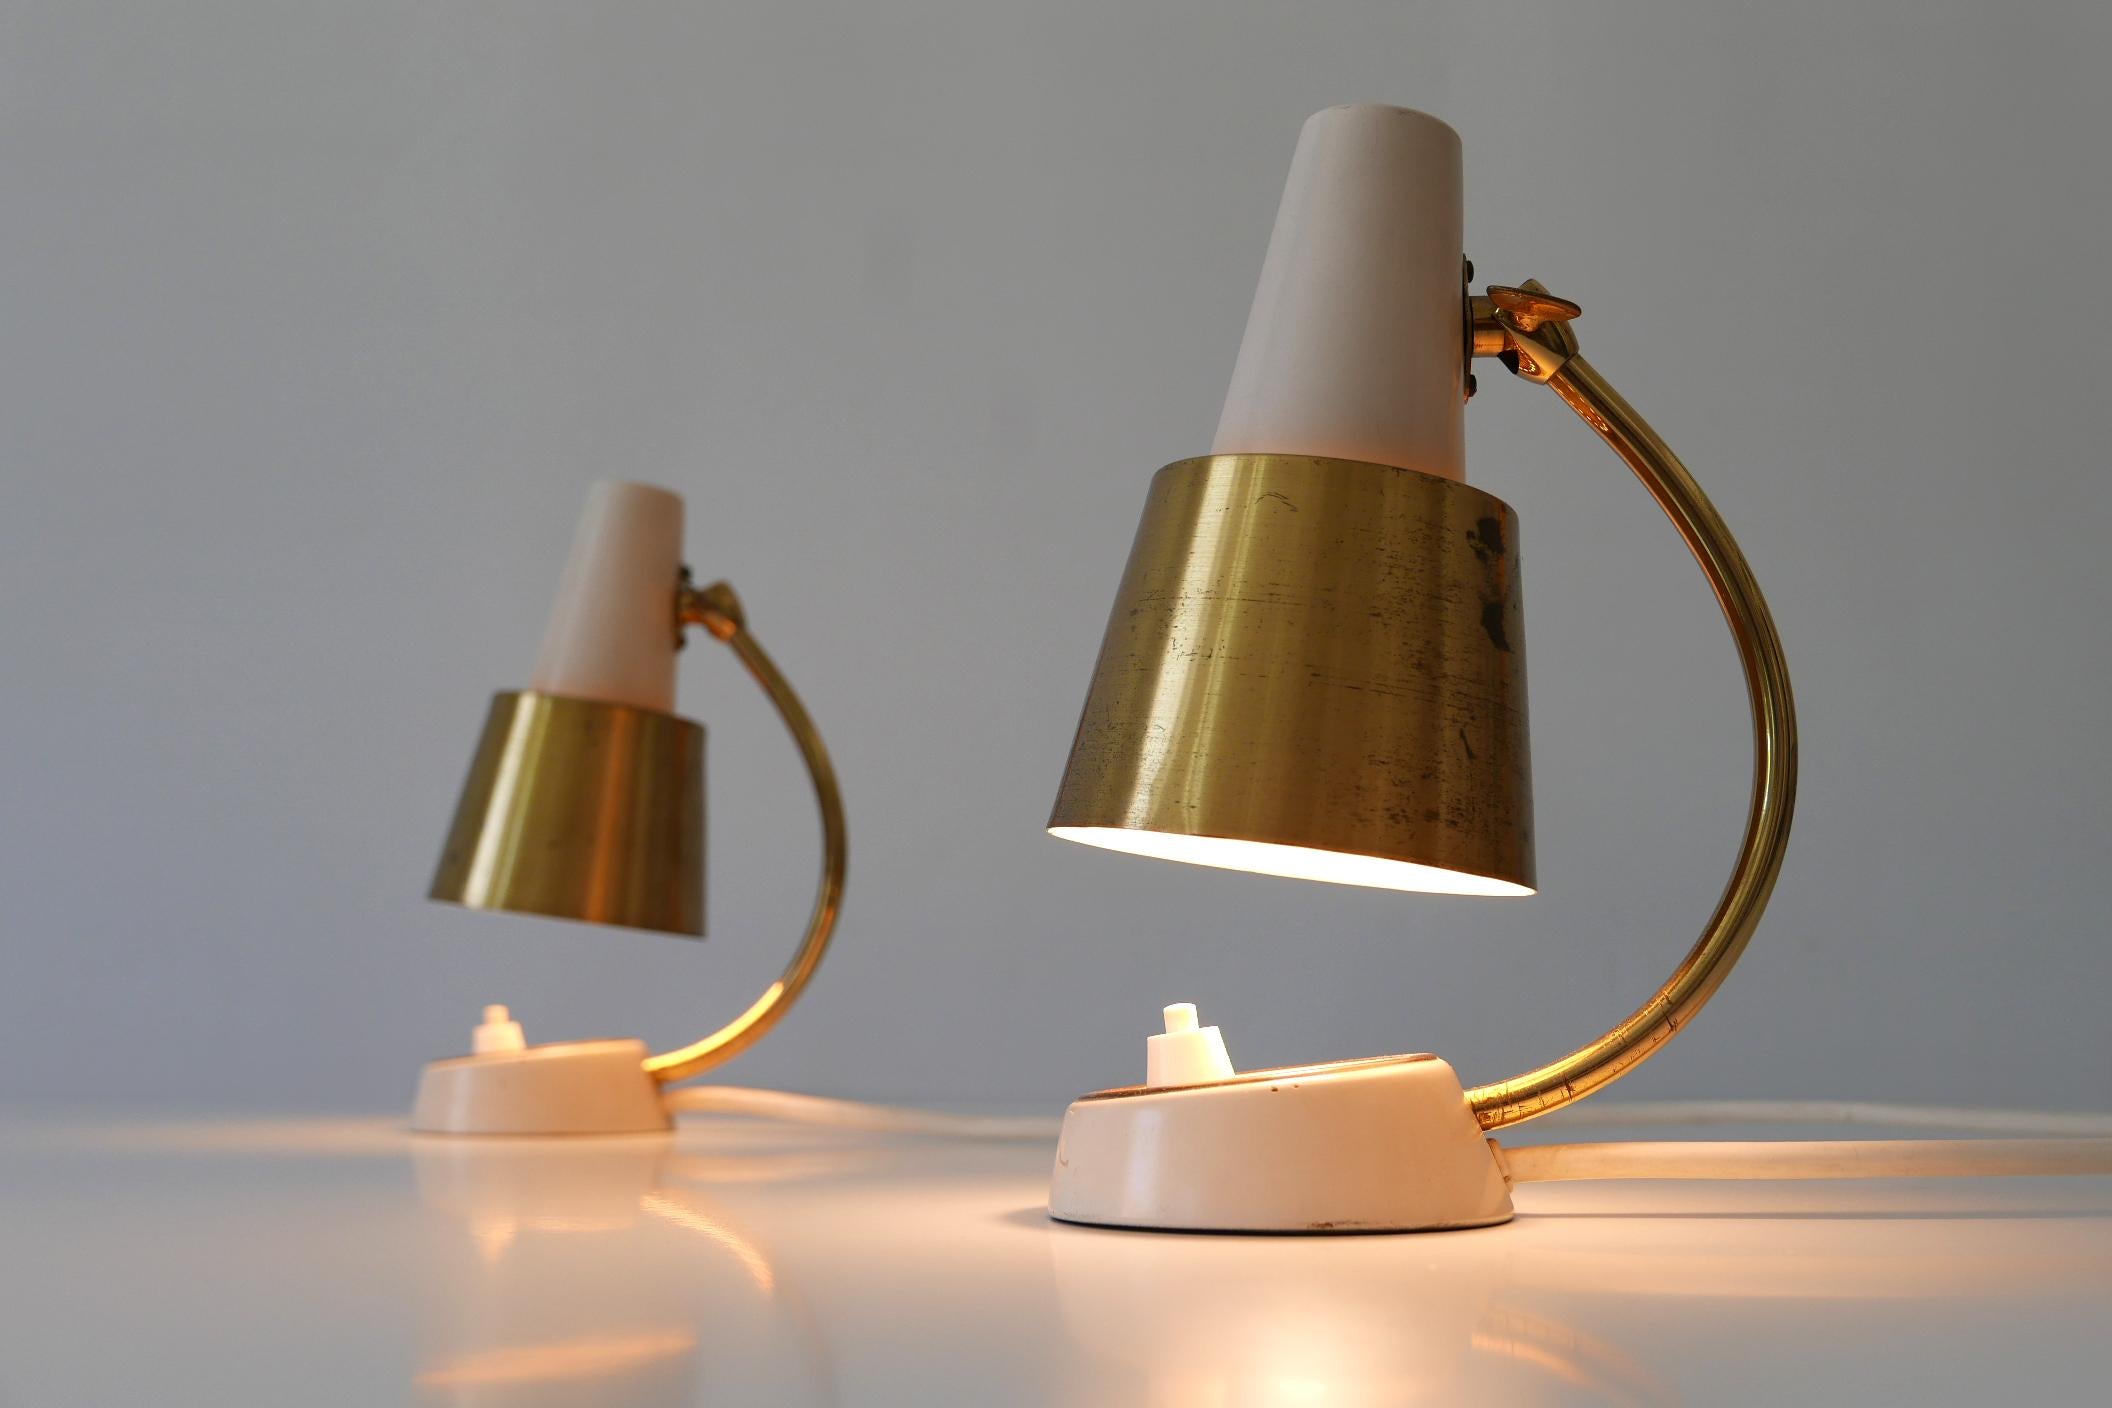 Set of Two Mid-Century Modern Bedside Table Lamps or Wall Lights, 1950s, Germany In Good Condition For Sale In Munich, DE